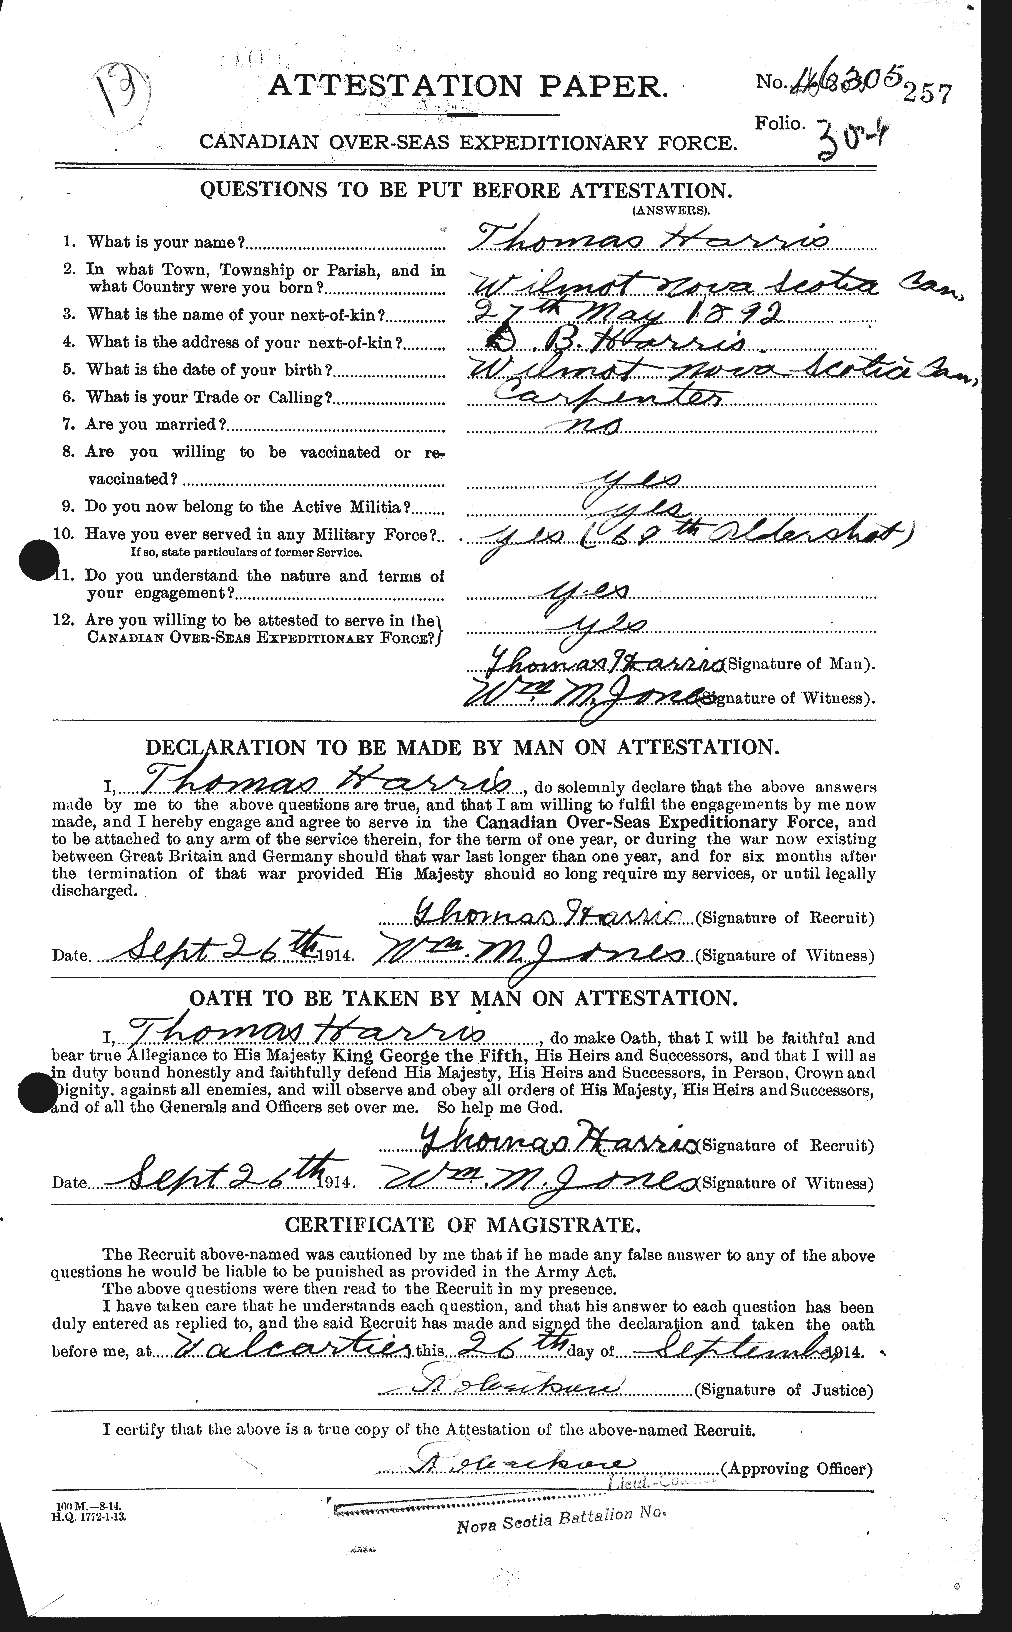 Personnel Records of the First World War - CEF 378226a